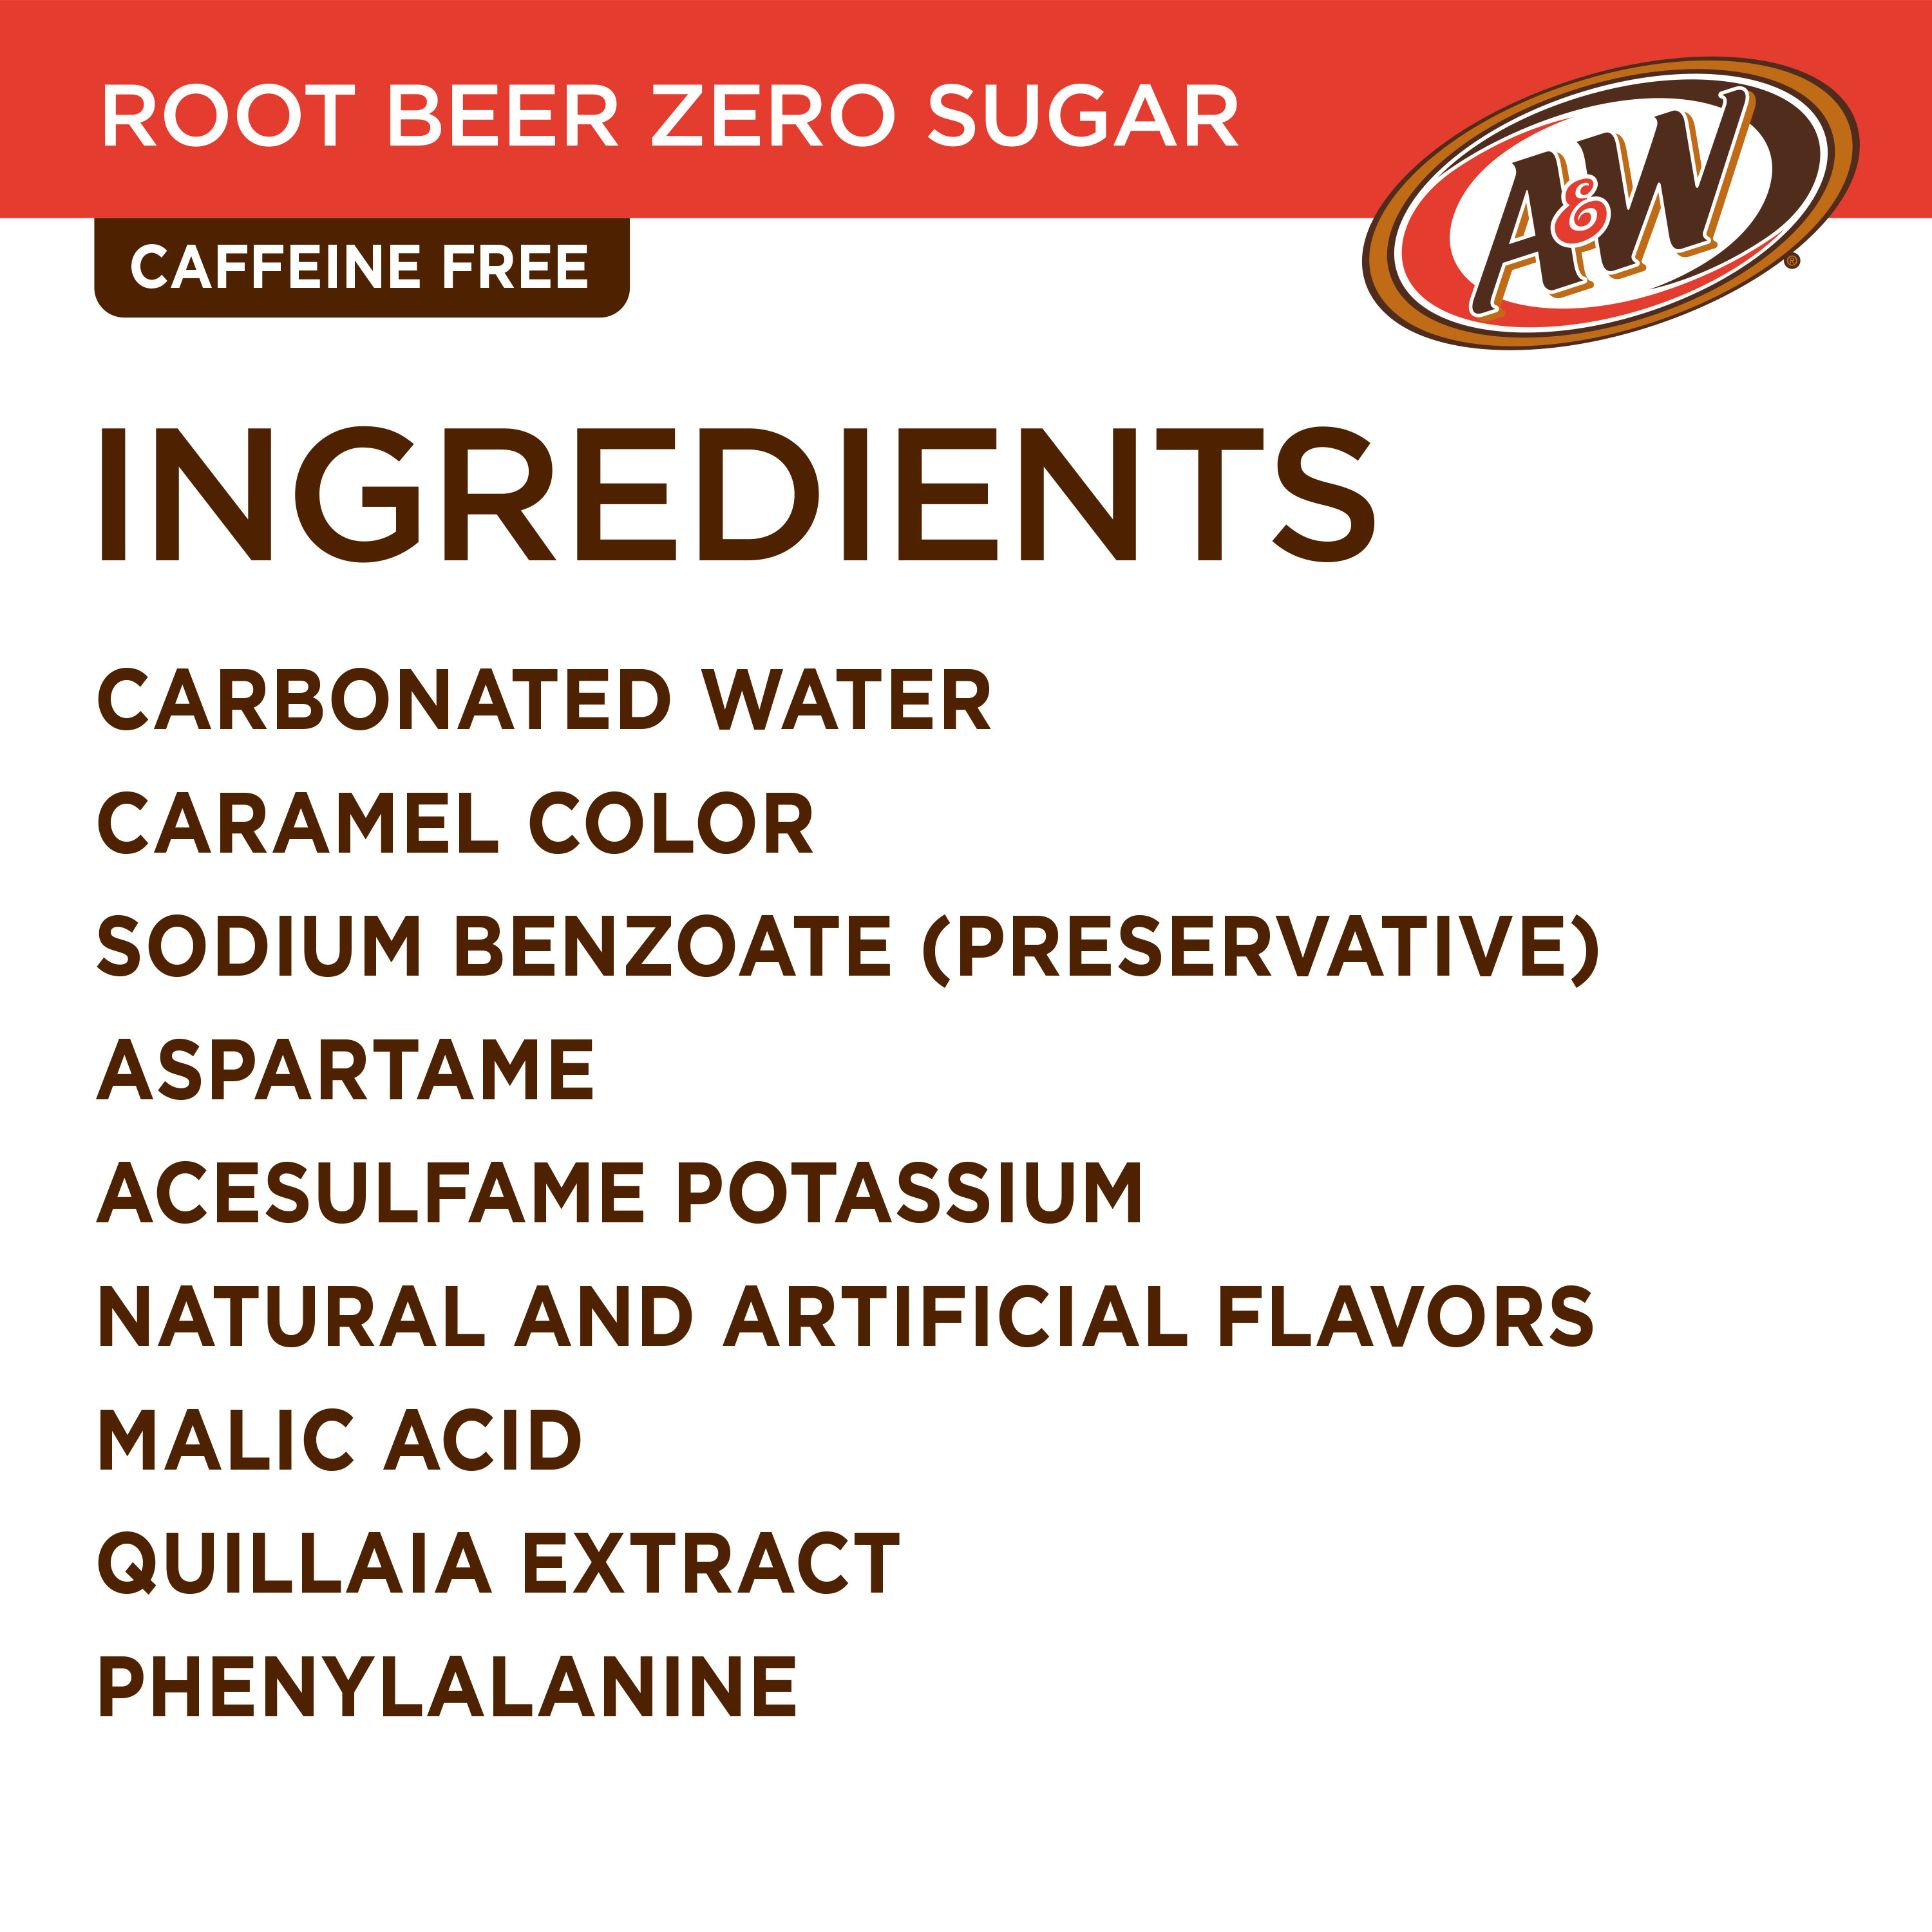 A&W Zero Sugar Root Beer Soda Pop, 12 fl oz, 12 Pack Cans - image 5 of 13